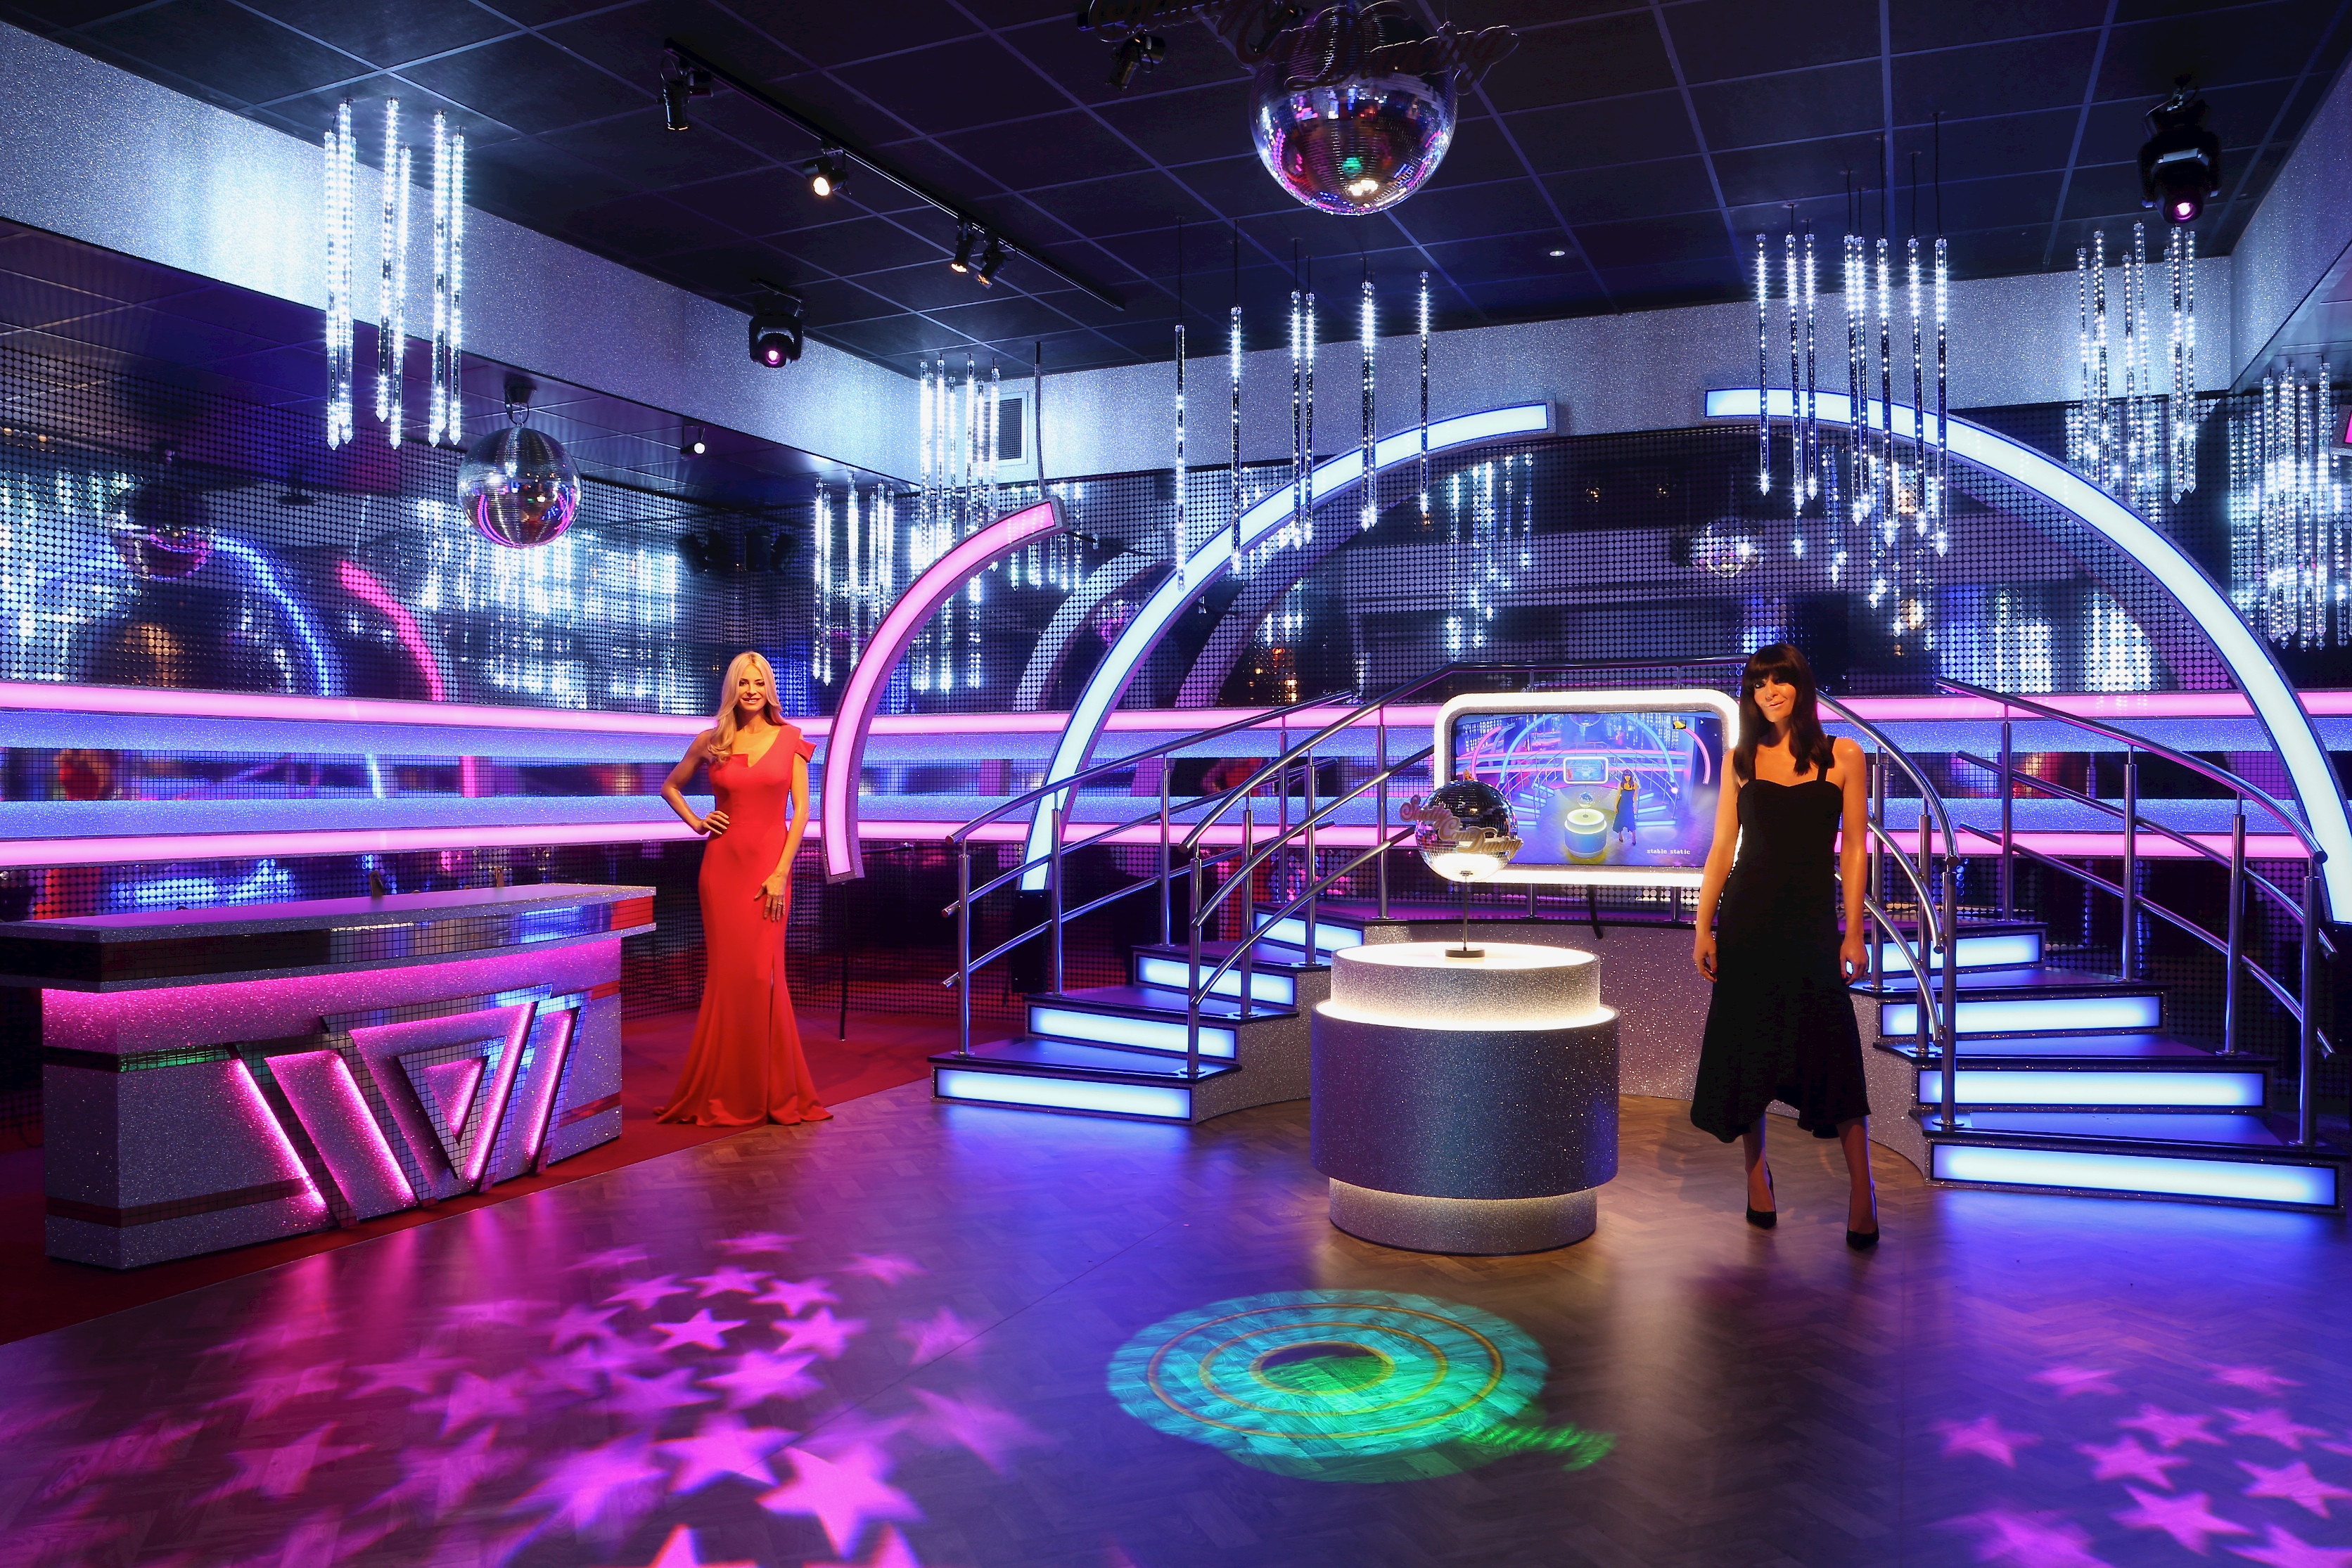 Strictly come dancing set at Madame Tussauds Blackpool